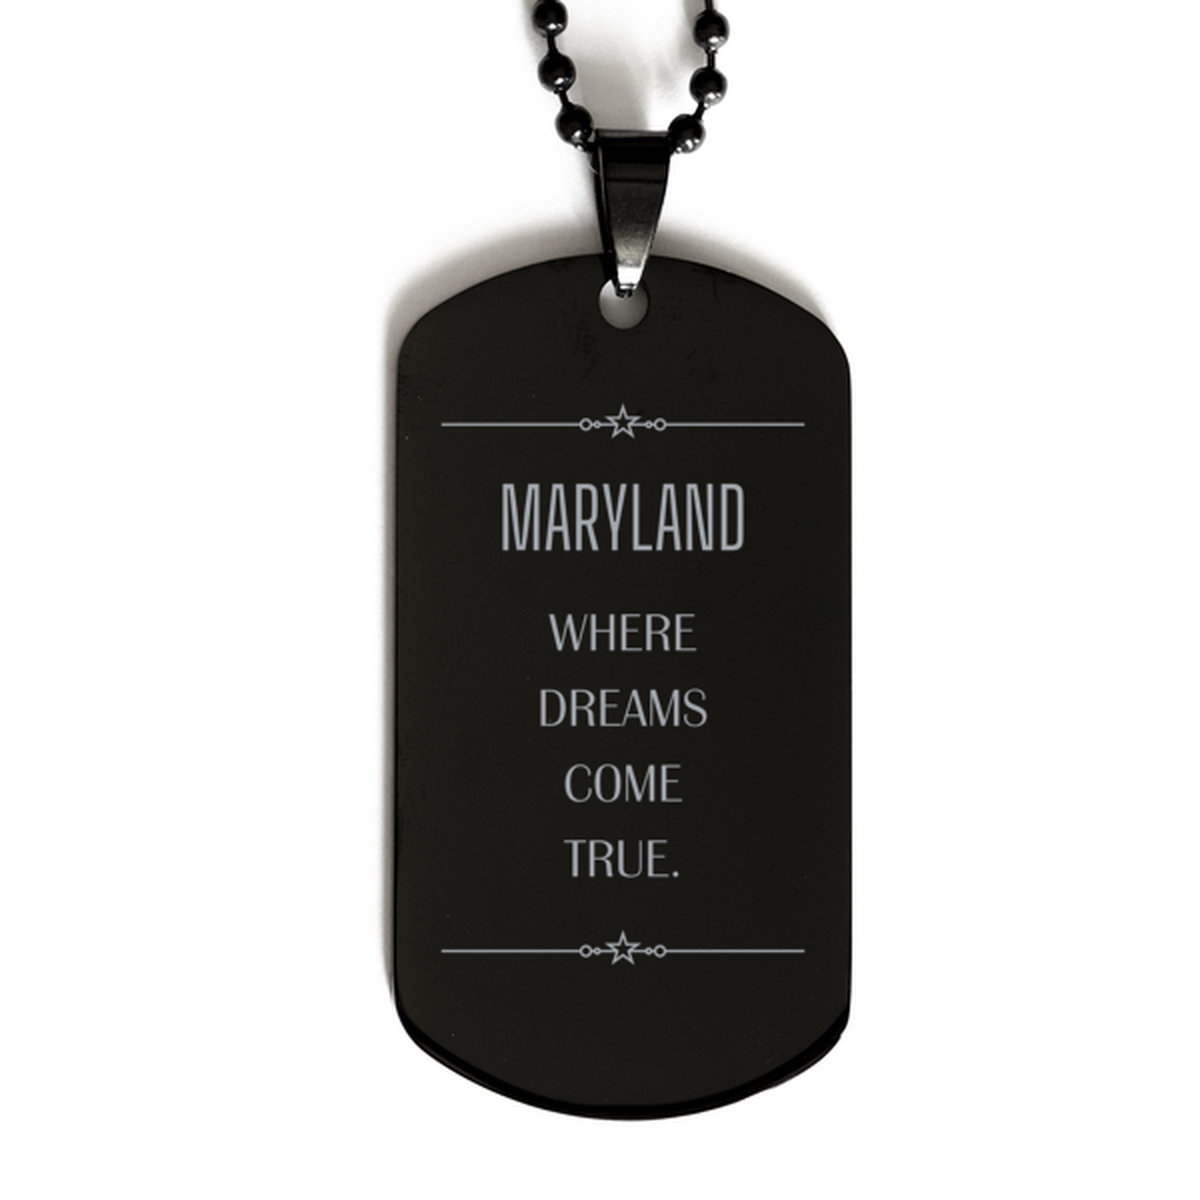 Love Maryland State Black Dog Tag, Maryland Where dreams come true, Birthday Inspirational Gifts For Maryland Men, Women, Friends